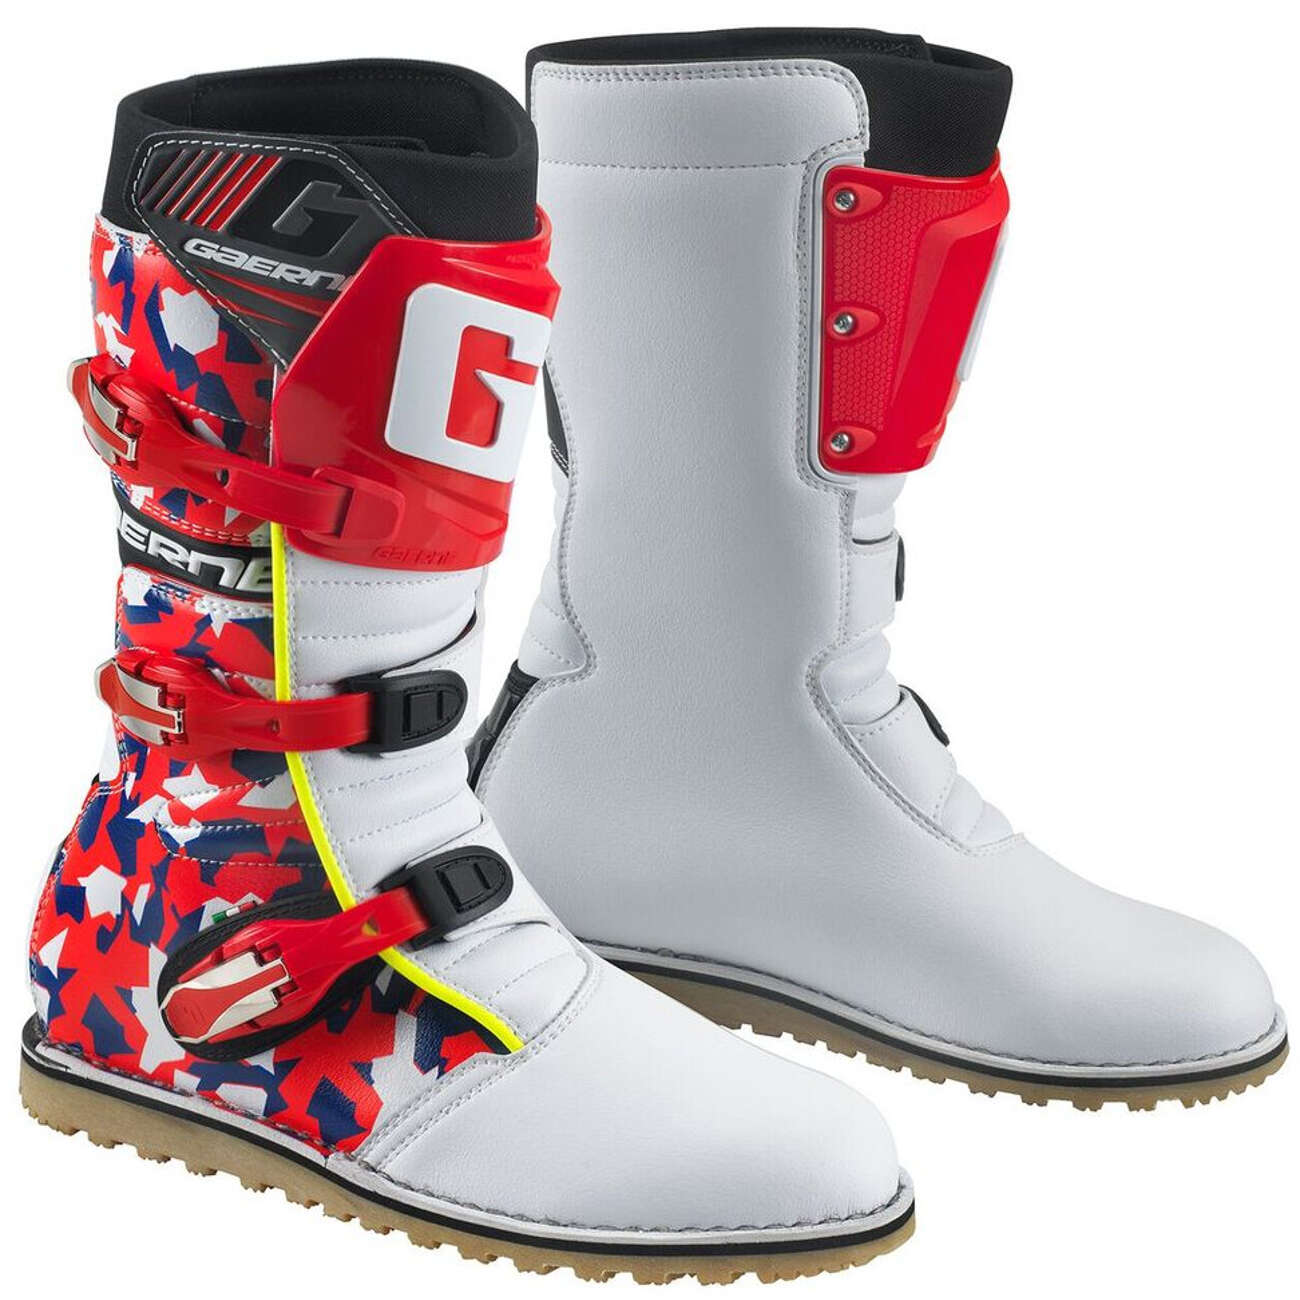 Gaerne Boots Balance Classic Camo Red